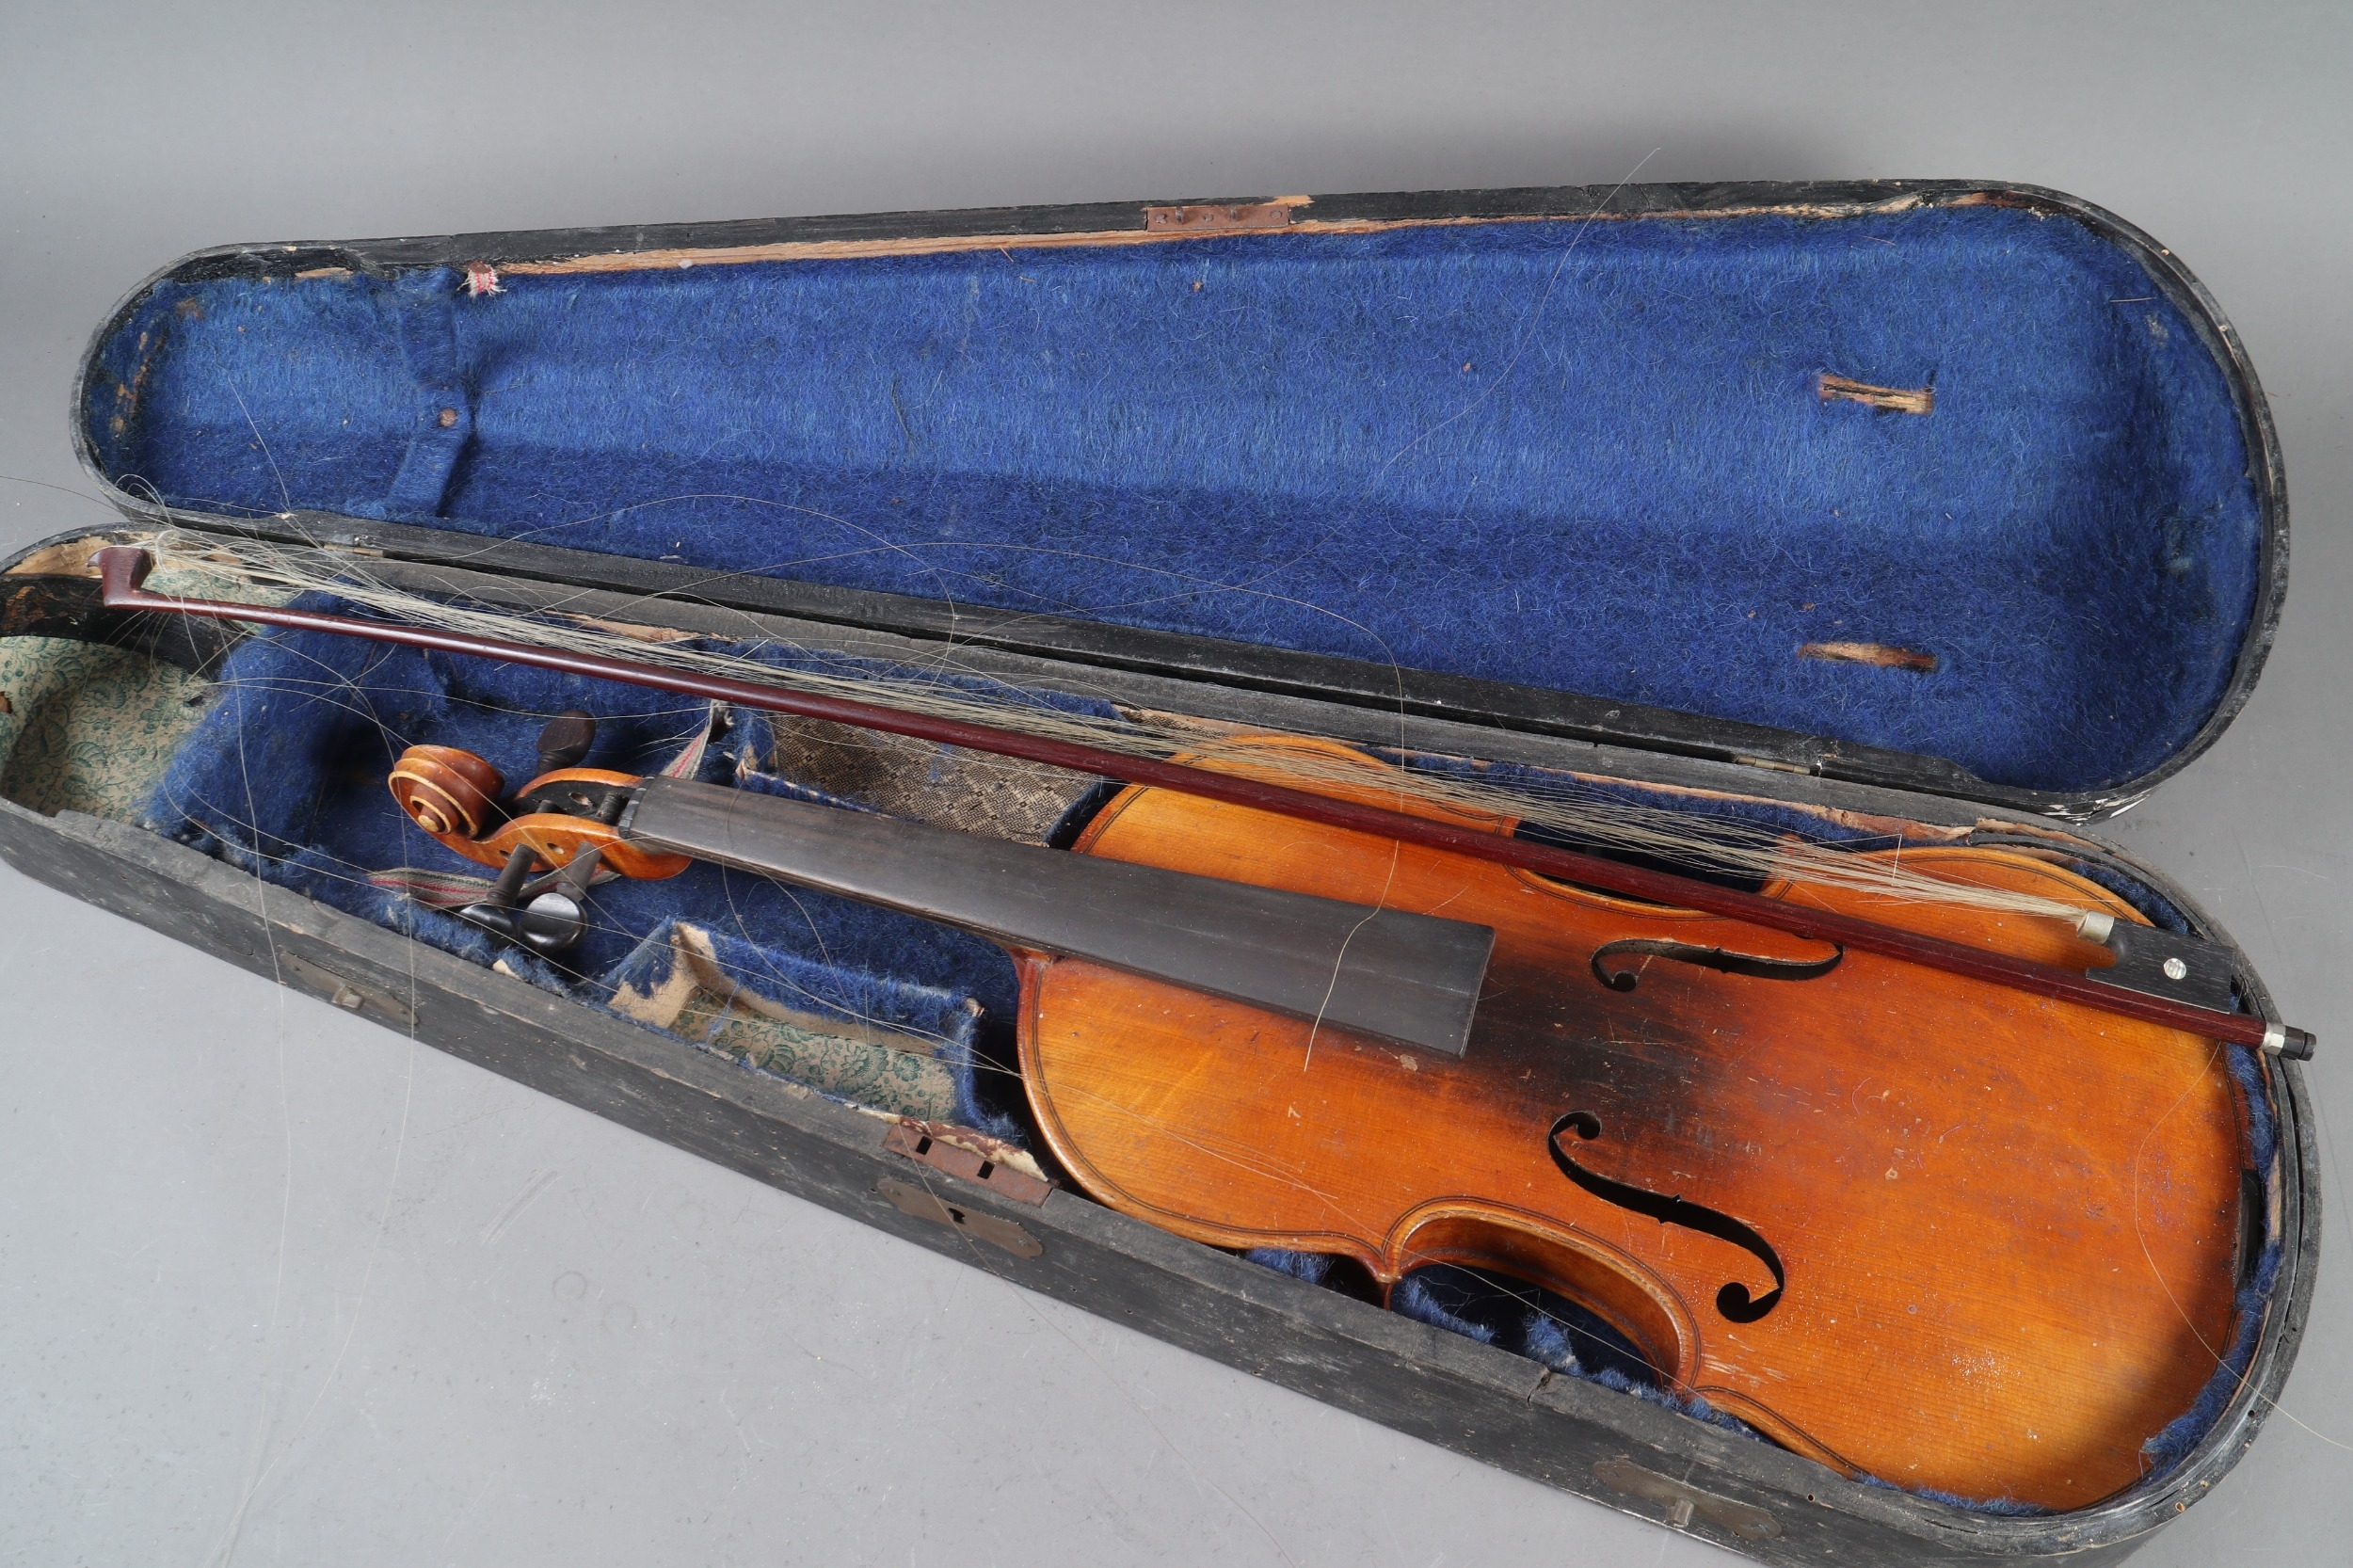 A student's violin and bow, in a wooden case, Violin is 23" long